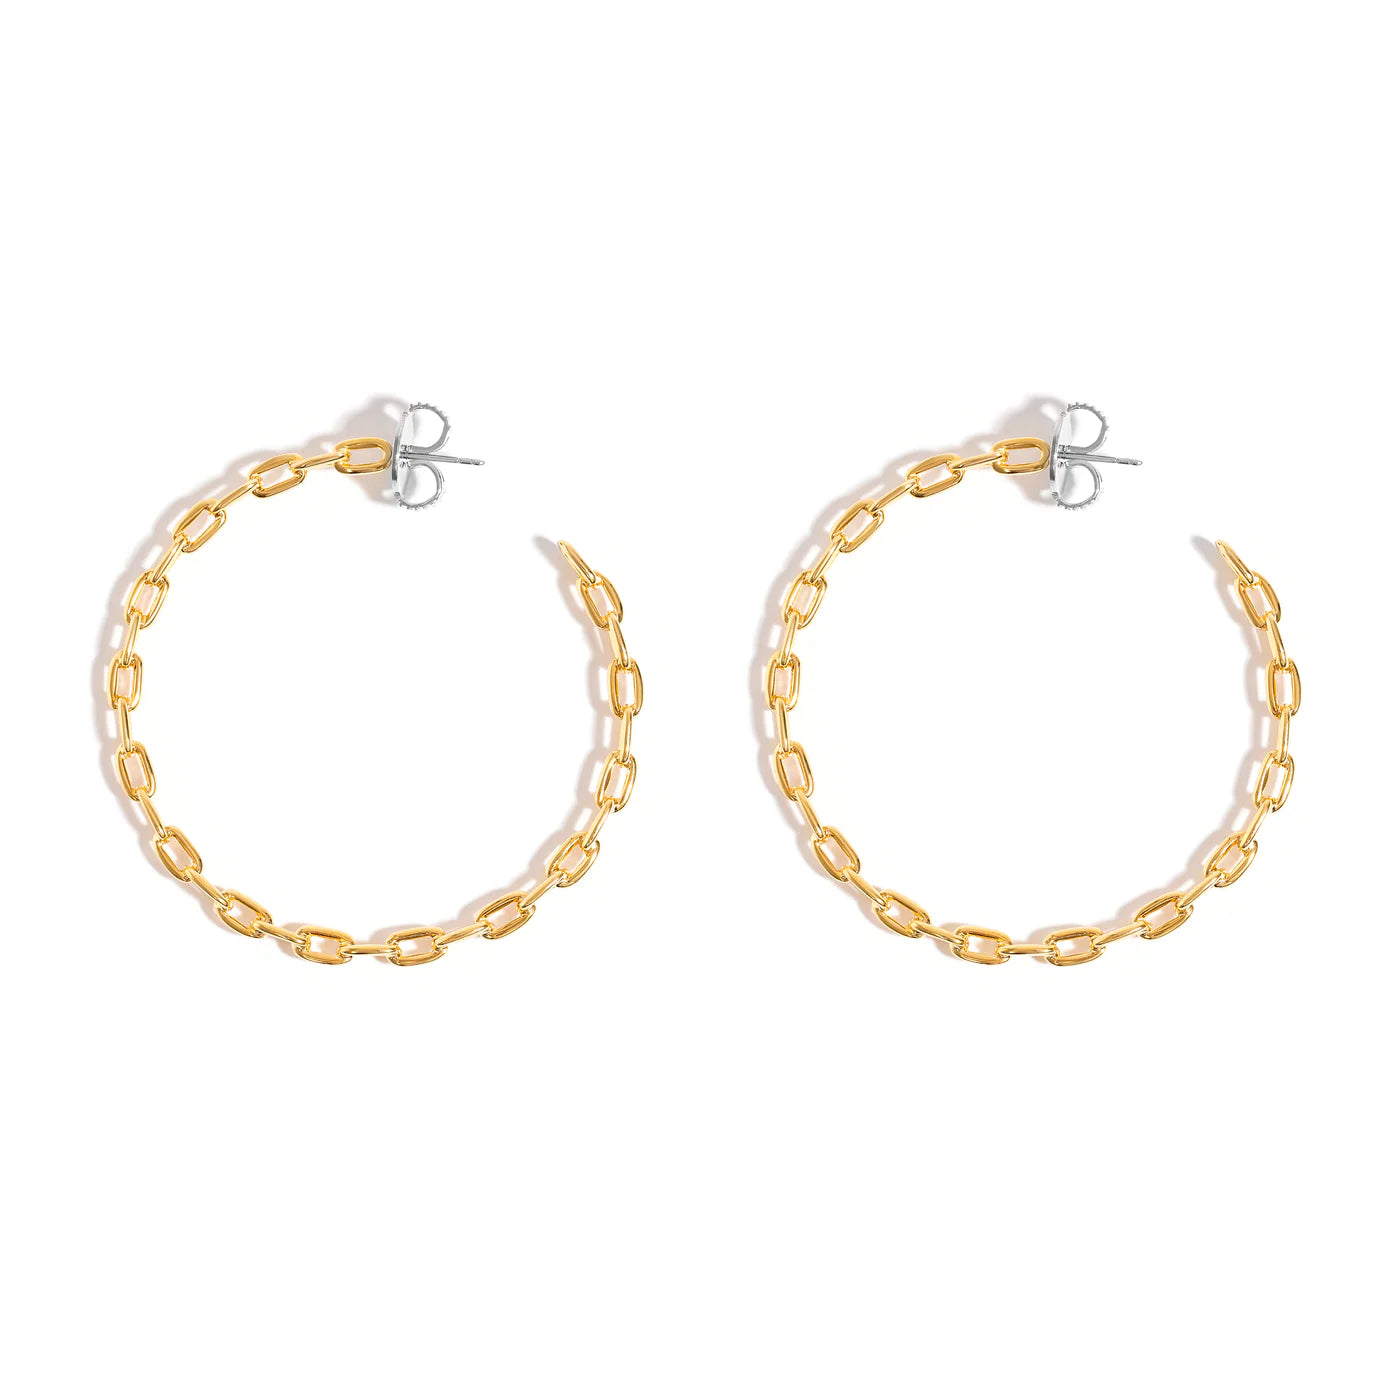 LARGE CHAIN HOOP EARRING IN 18K YELLOW GOLD PLATED SILVER